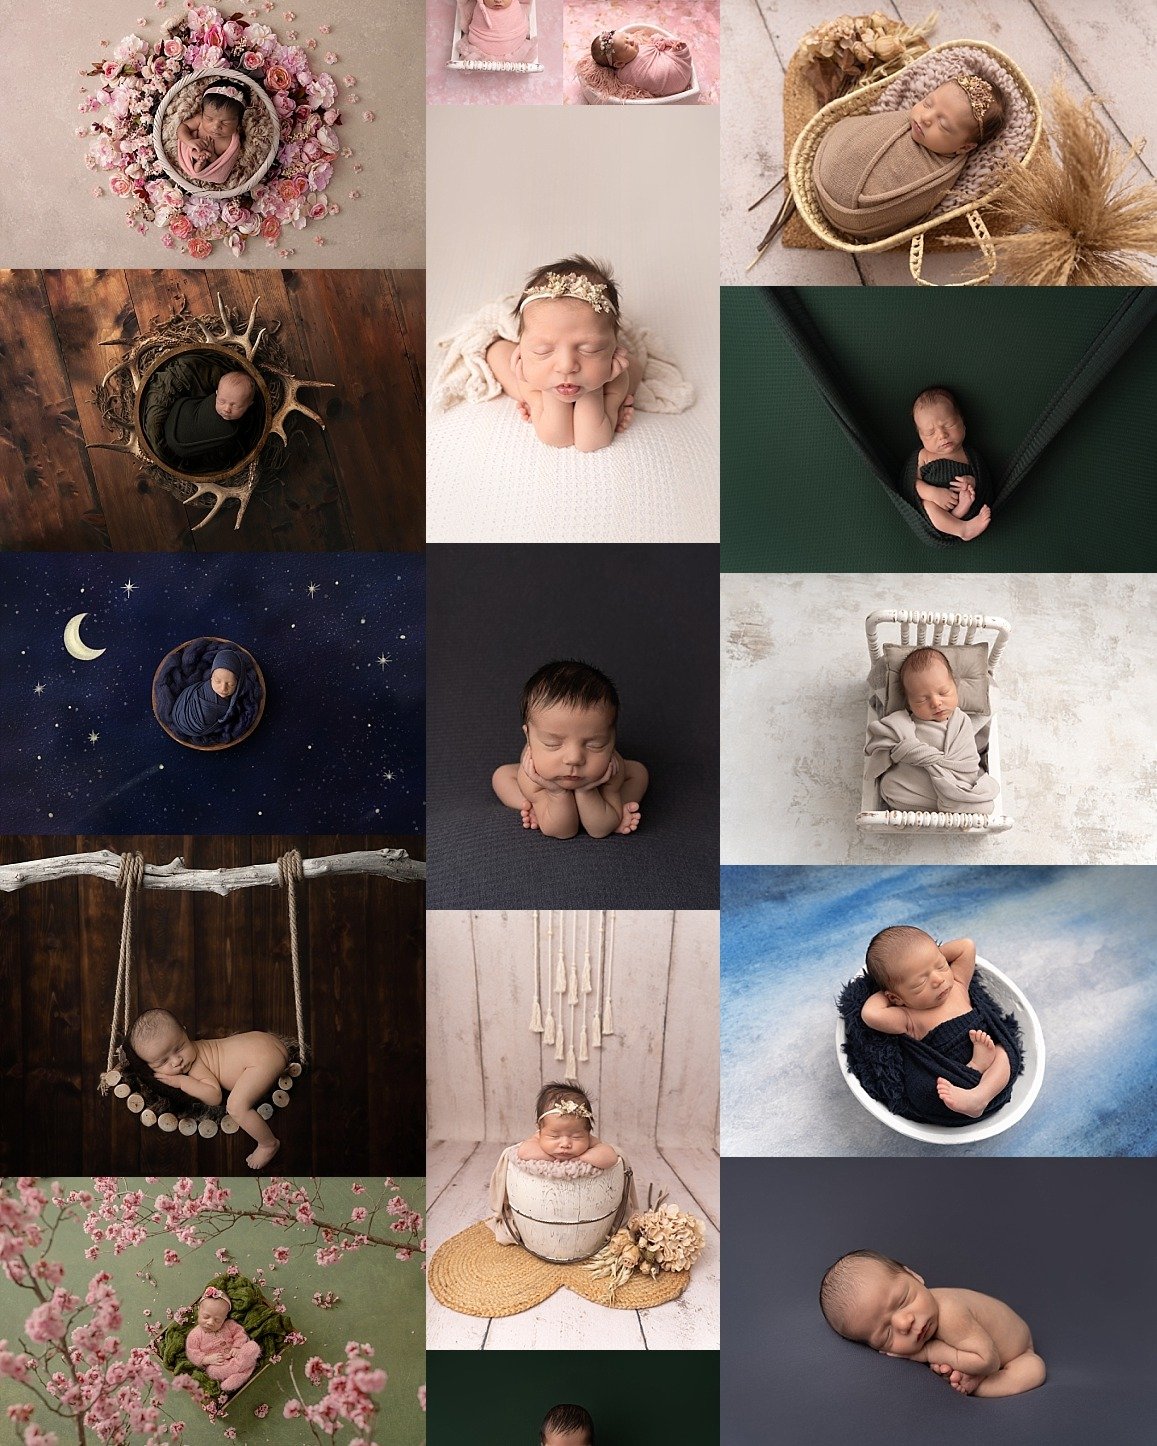 Book a newborn session &amp; receive a FREE MATERNITY Mini Session or MILESTONE session! 

Mini Newborn Session - Just baby being photographed. $379.00
Full Newborn Session - Immediate family, sibling, parent poses, &amp; individual newborn. $439.00
